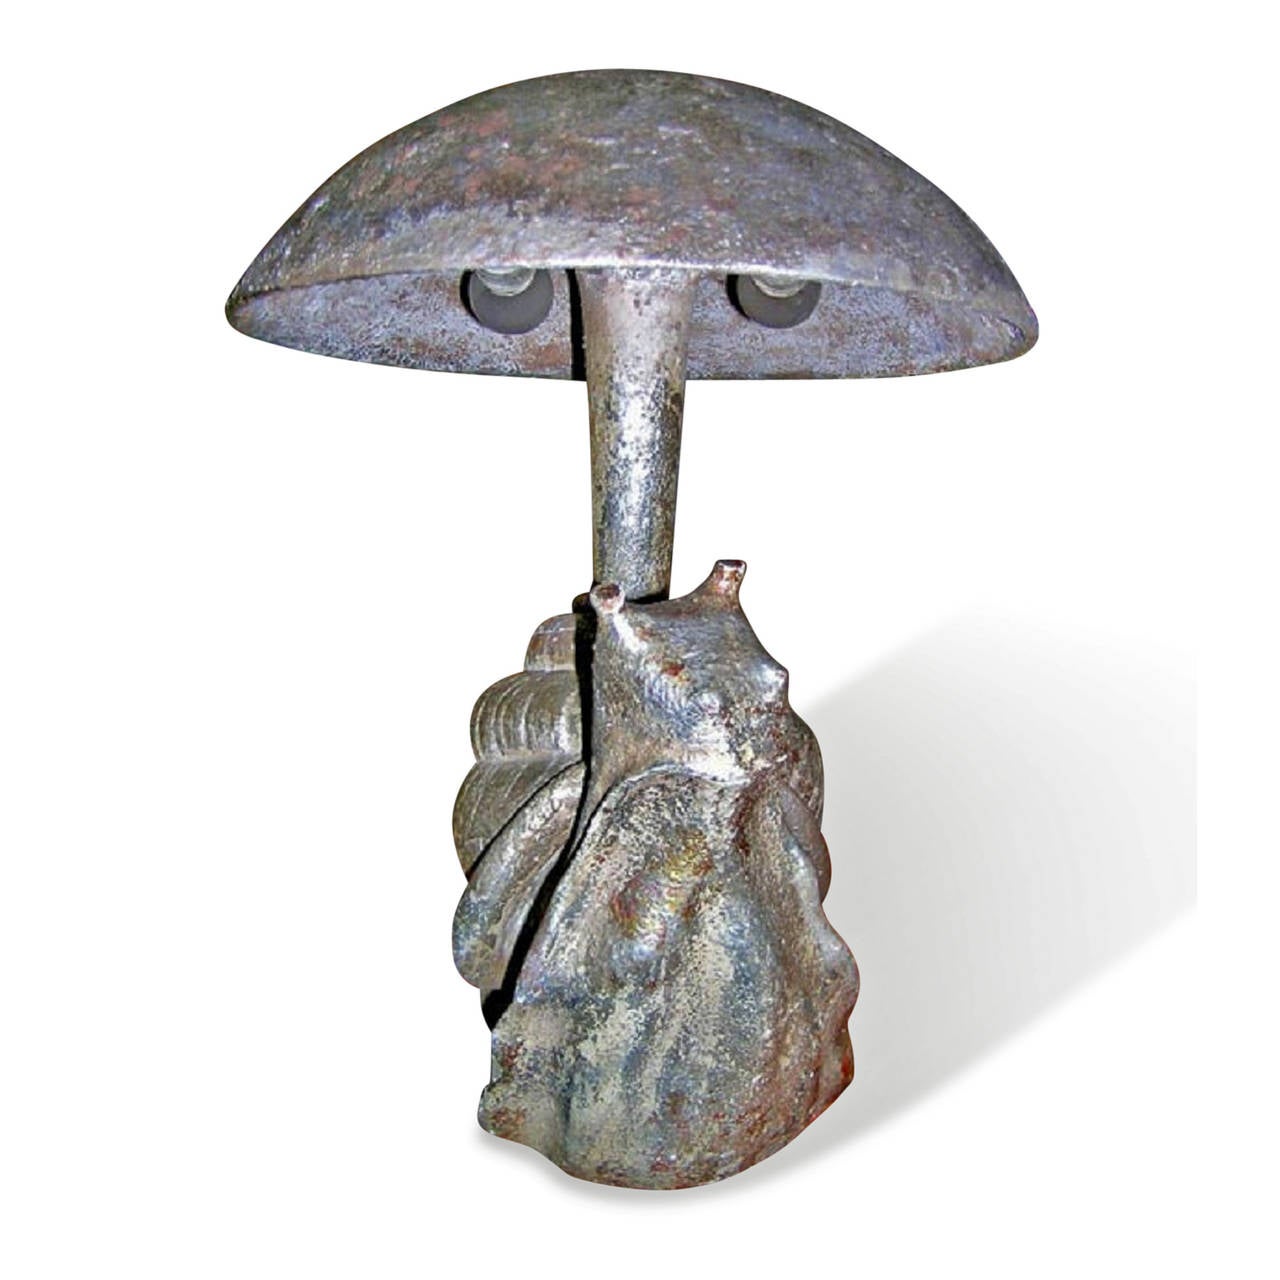 Plaster composition silvered snail form lamp, by James Mont, American late 1940s, height 22.5, width 10